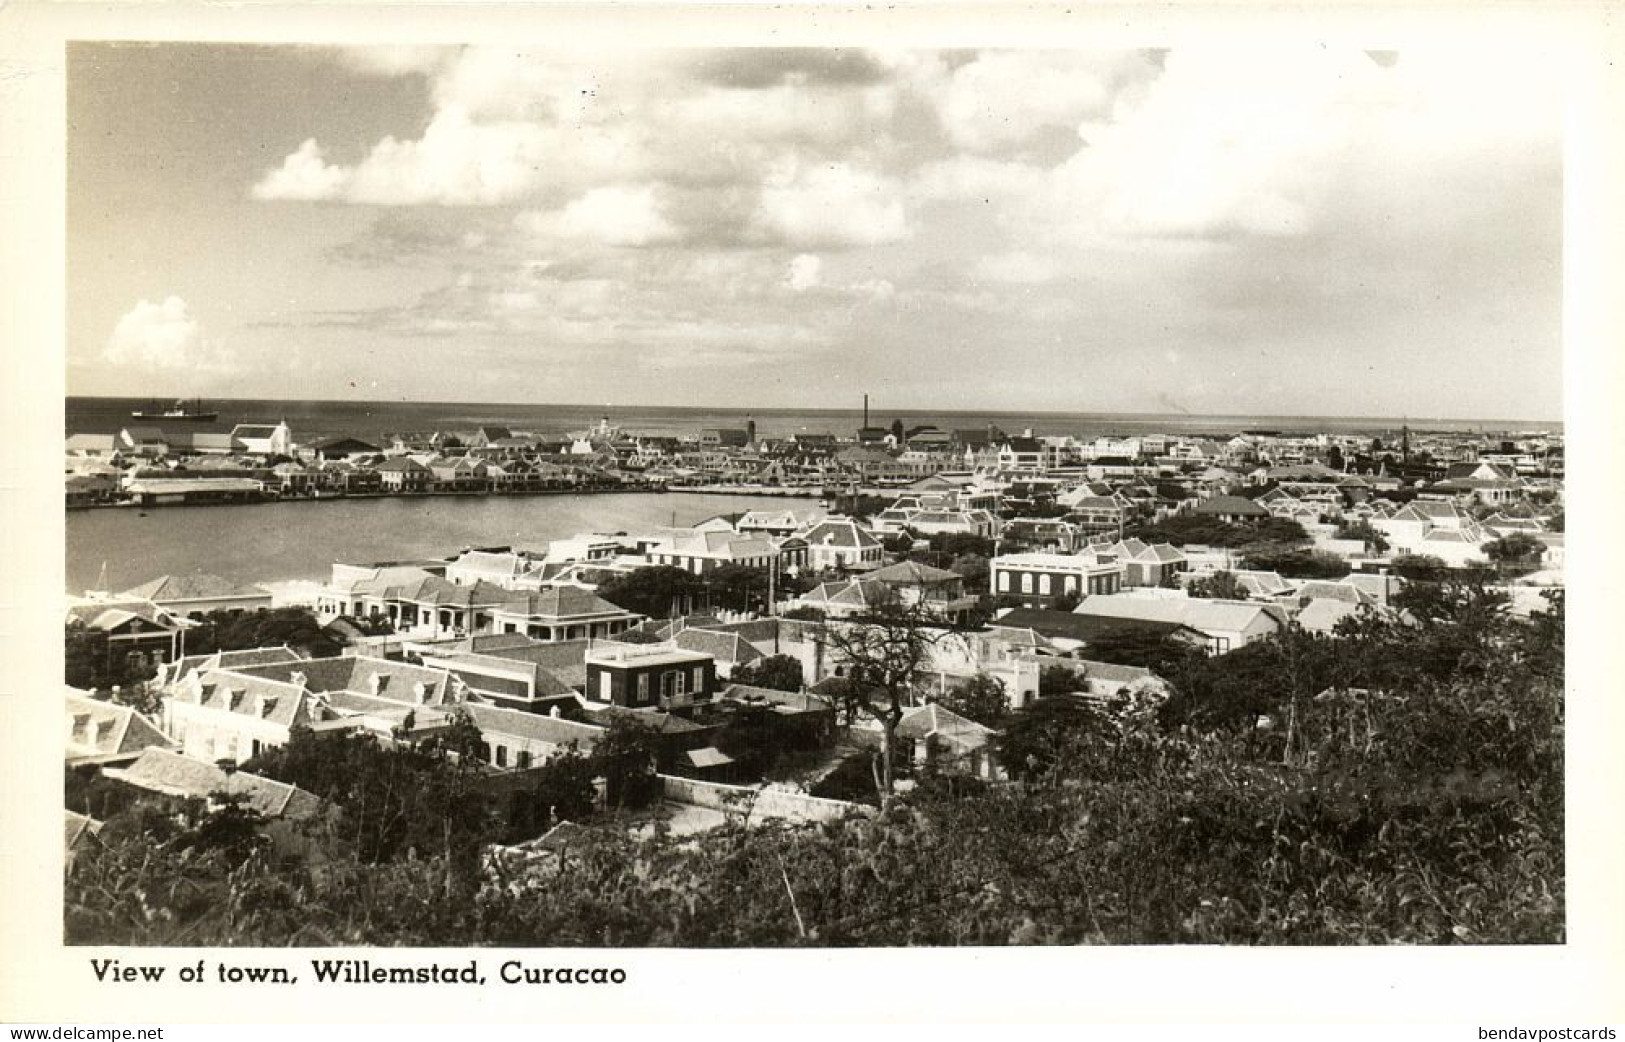 Curacao, WILLEMSTAD, View Of Town (1950s) Cunard White Star Line Postcard - Curaçao